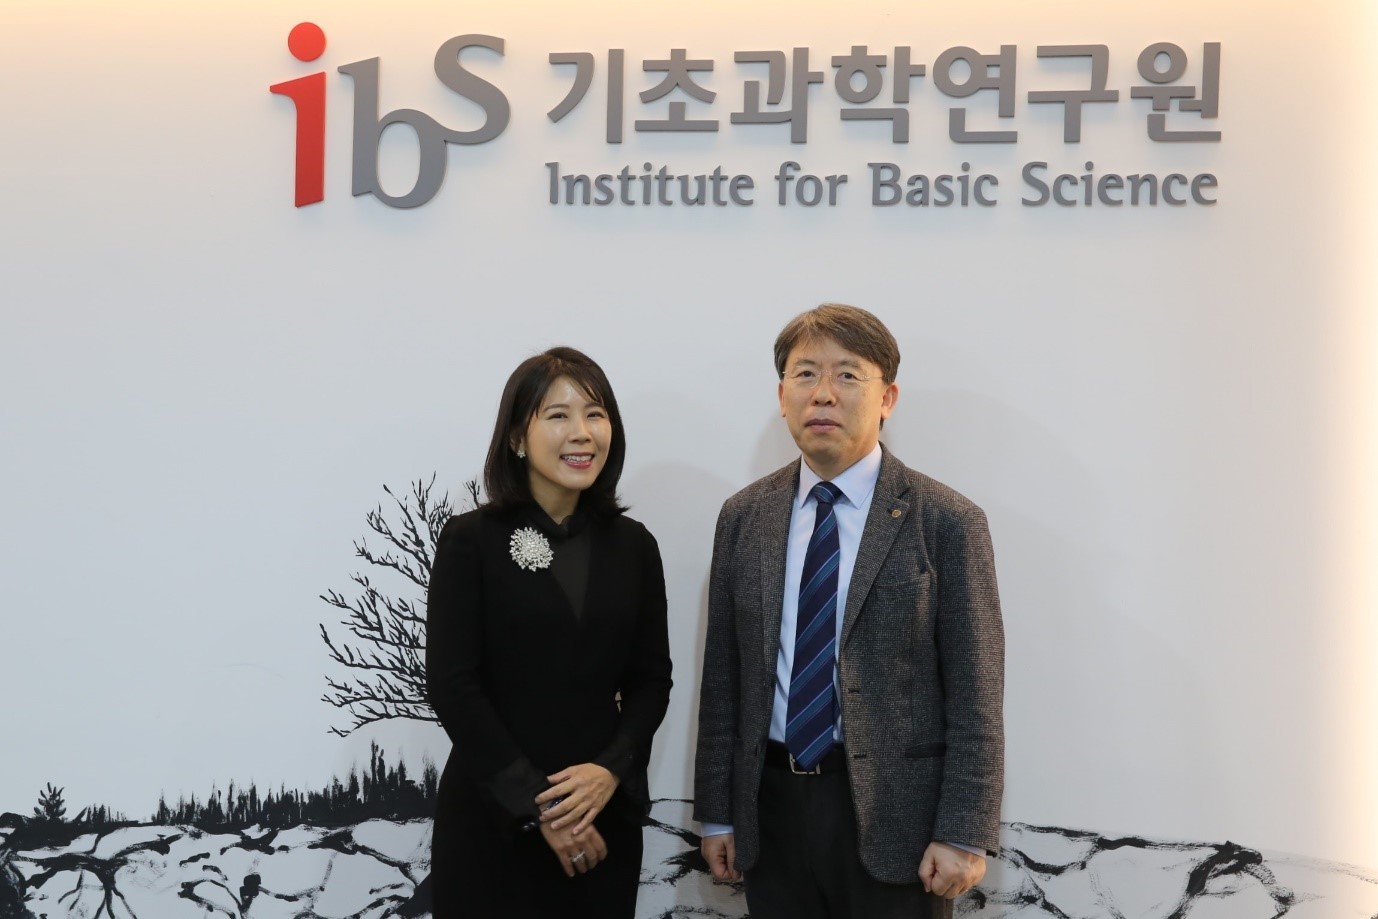 ▲ IBS President NOH Do Young (right), CI CHA Meeyoung (left)